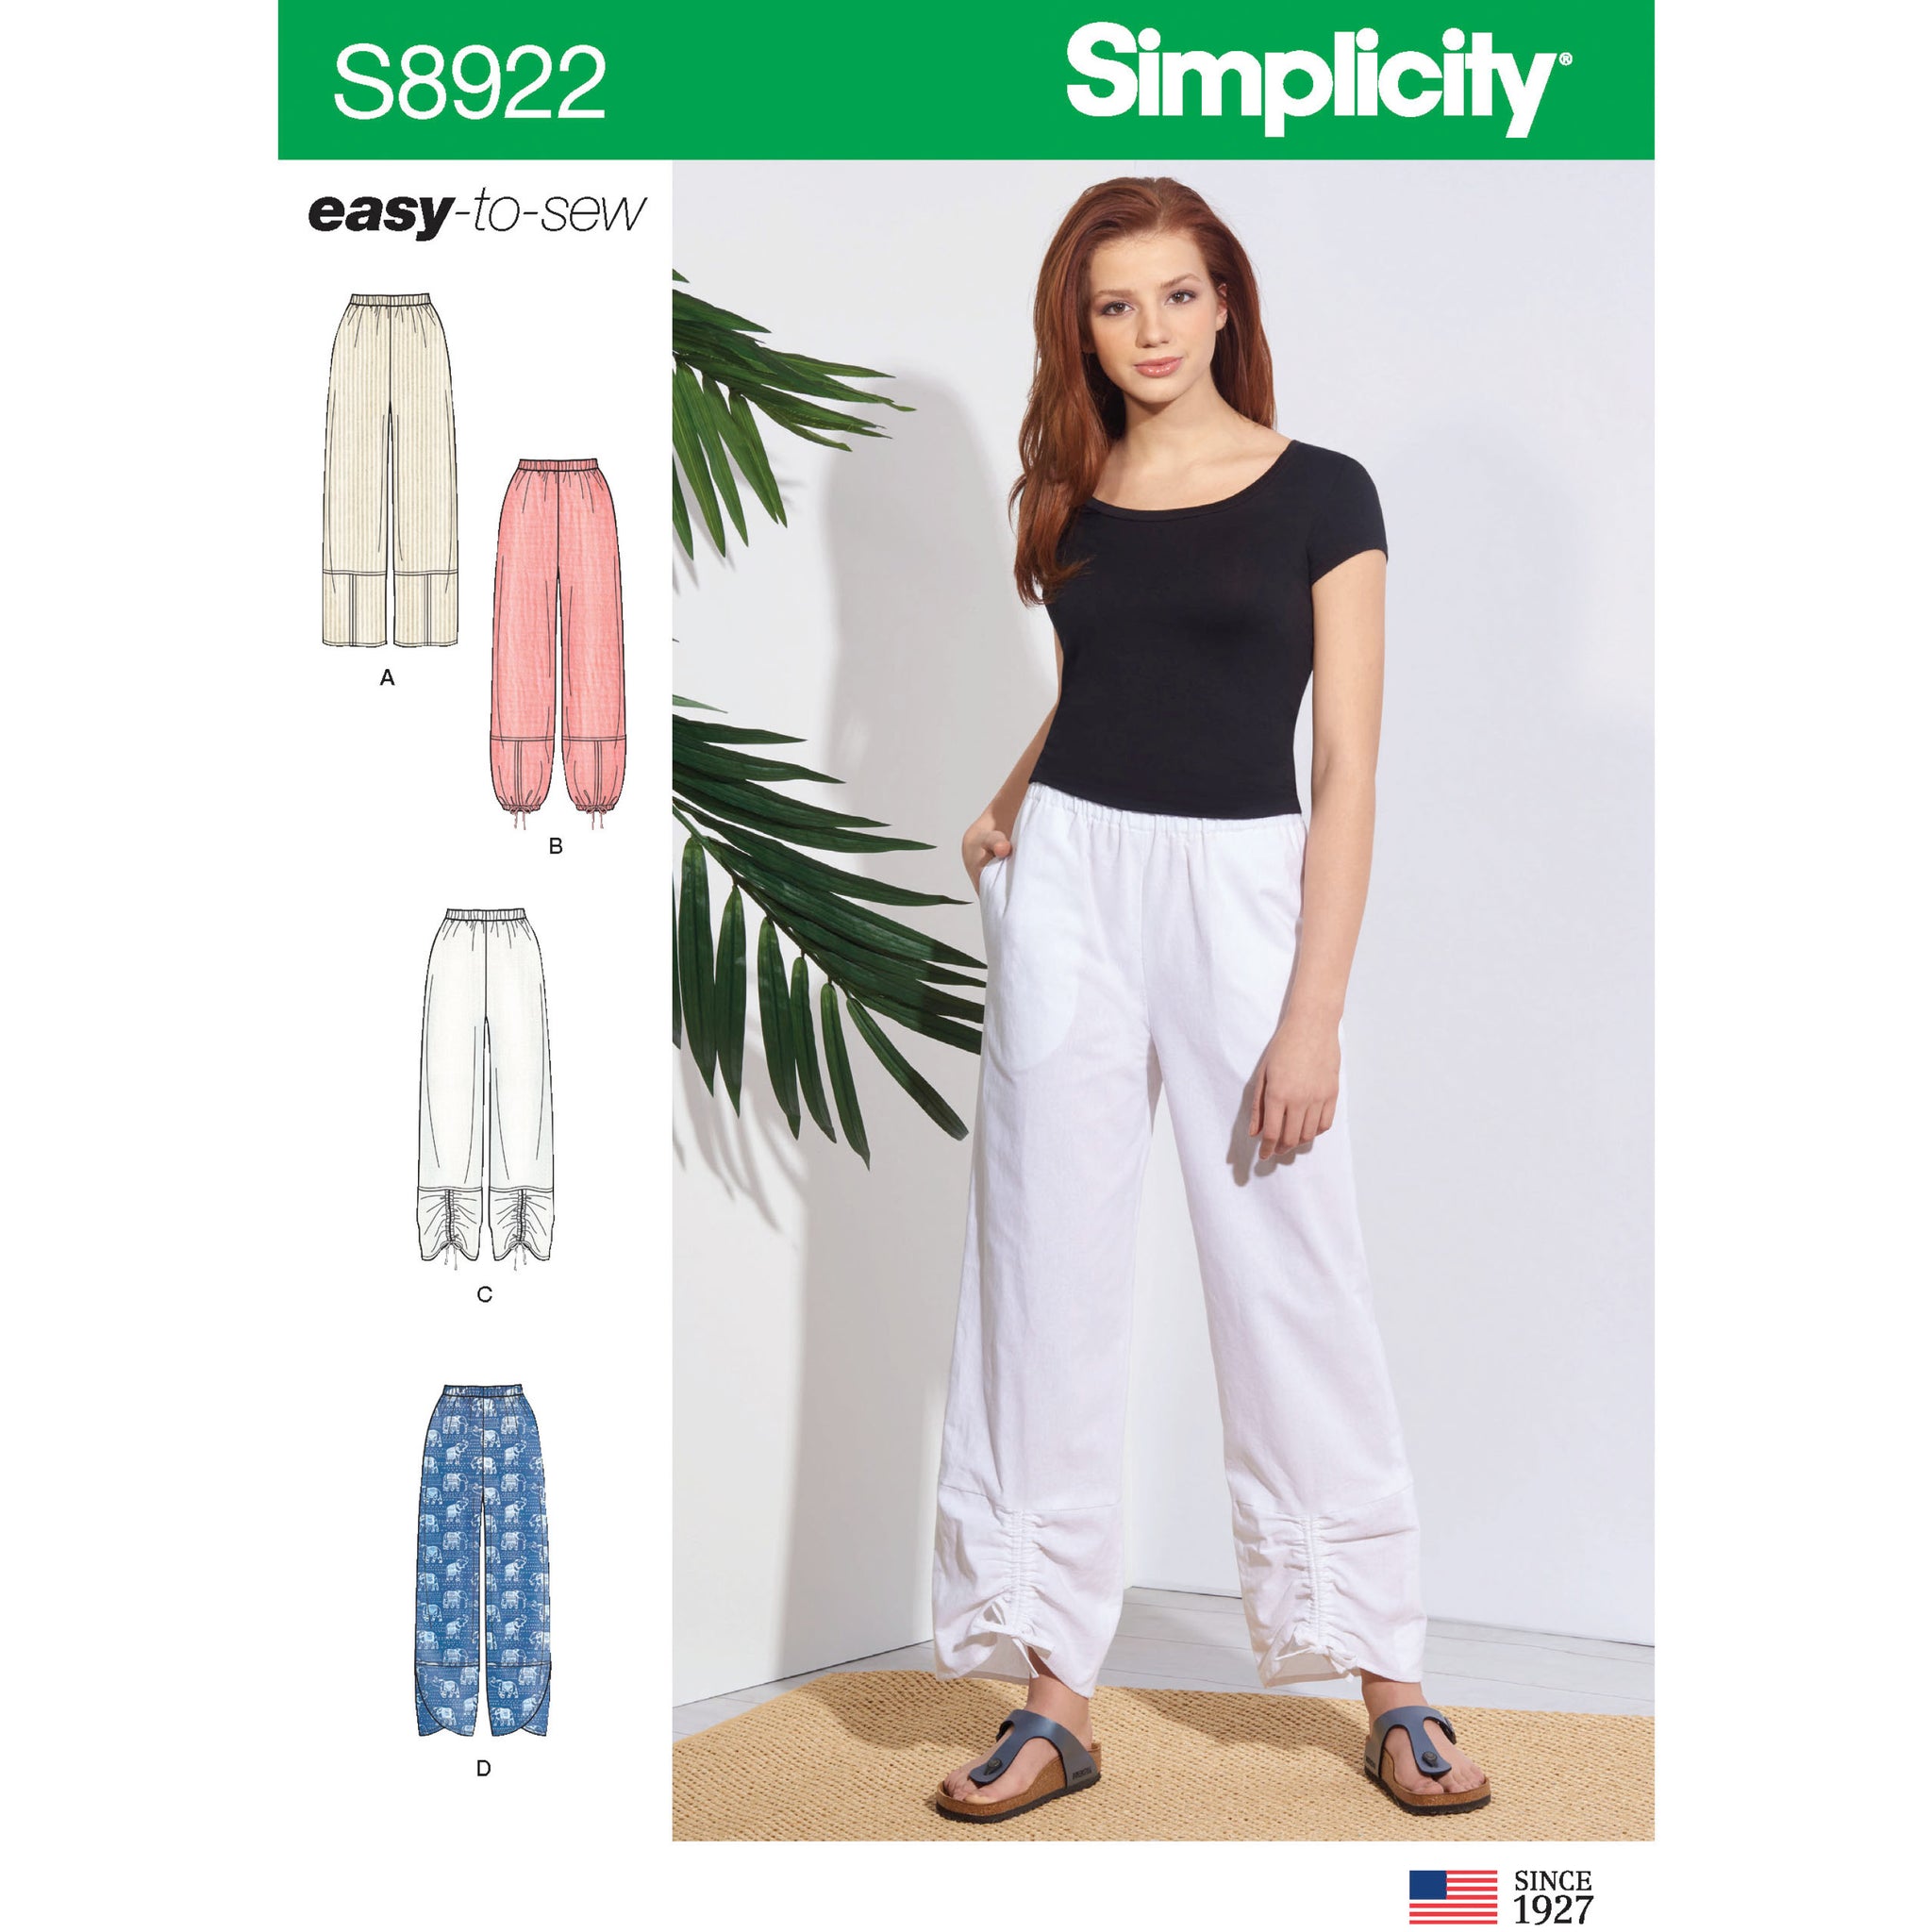 Simplicity 9113 Misses' Tunic, Top & Pull On Pants